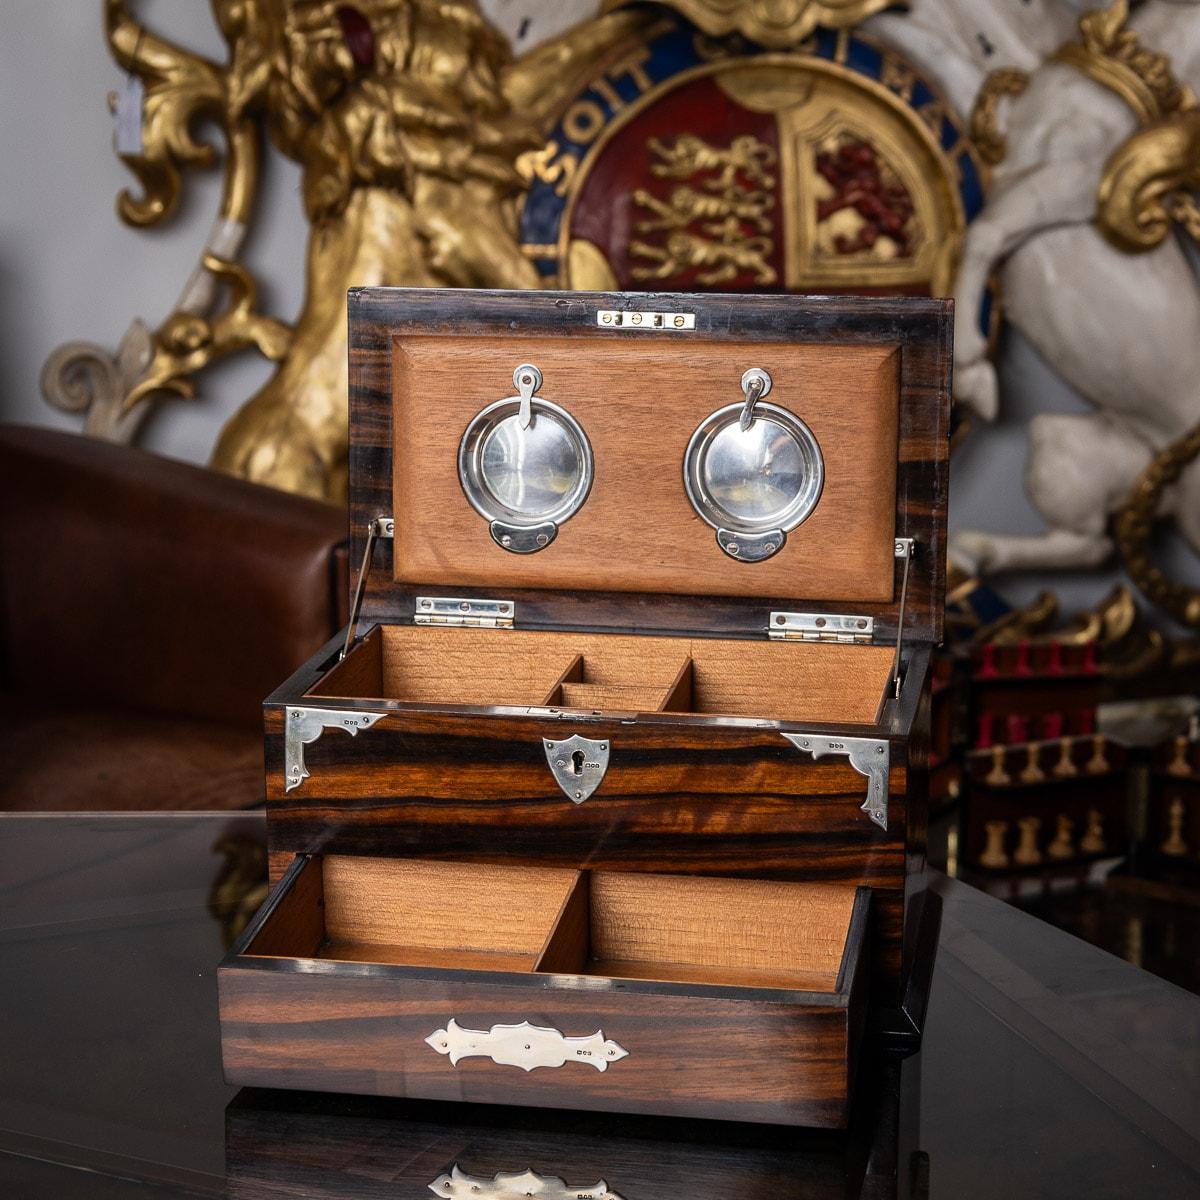 Antique early 20th century Victorian coromandel wood smoker's compendium box with solid silver mounts, two top drawers for cigarettes and cigars and two small compartments for matches, as the top lid is lifted the bottom draw automatically pulls out